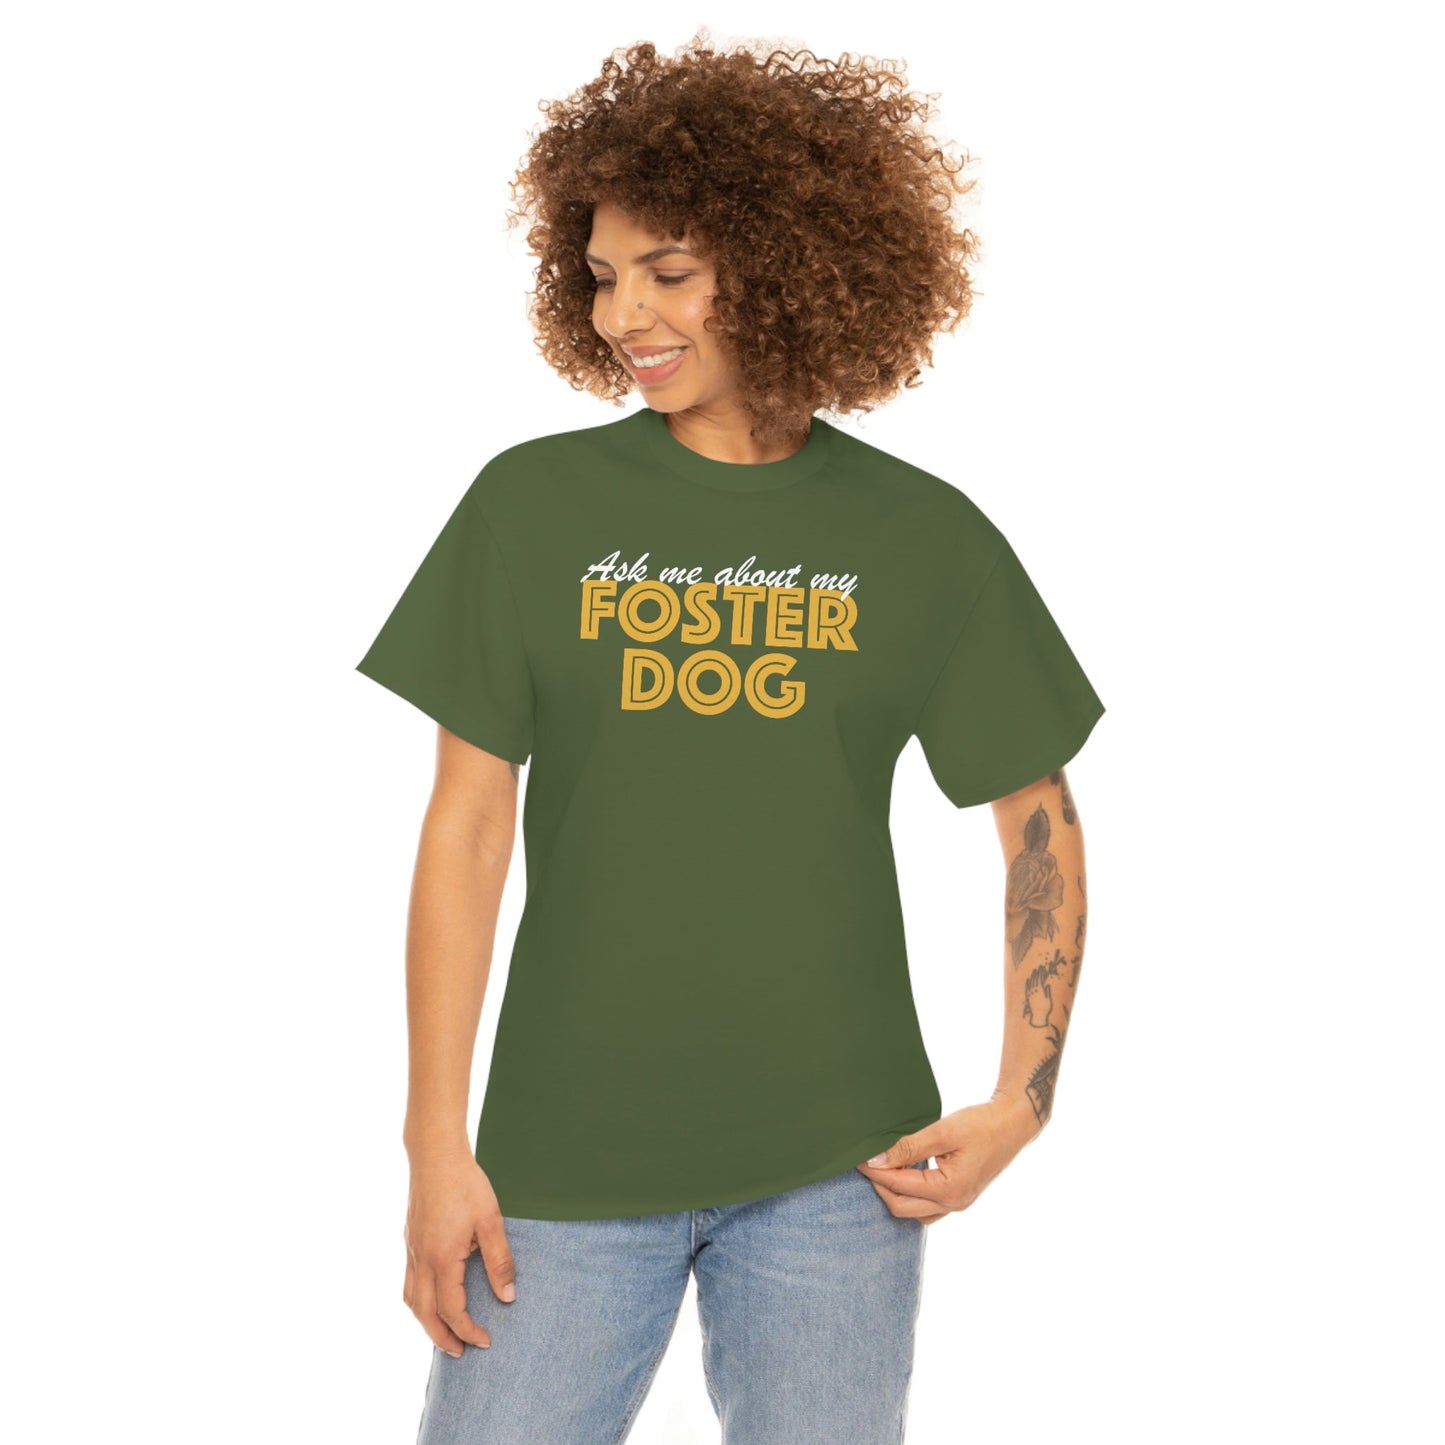 Ask Me About My Foster Dog | Text Tees - Detezi Designs-28250517782751666921